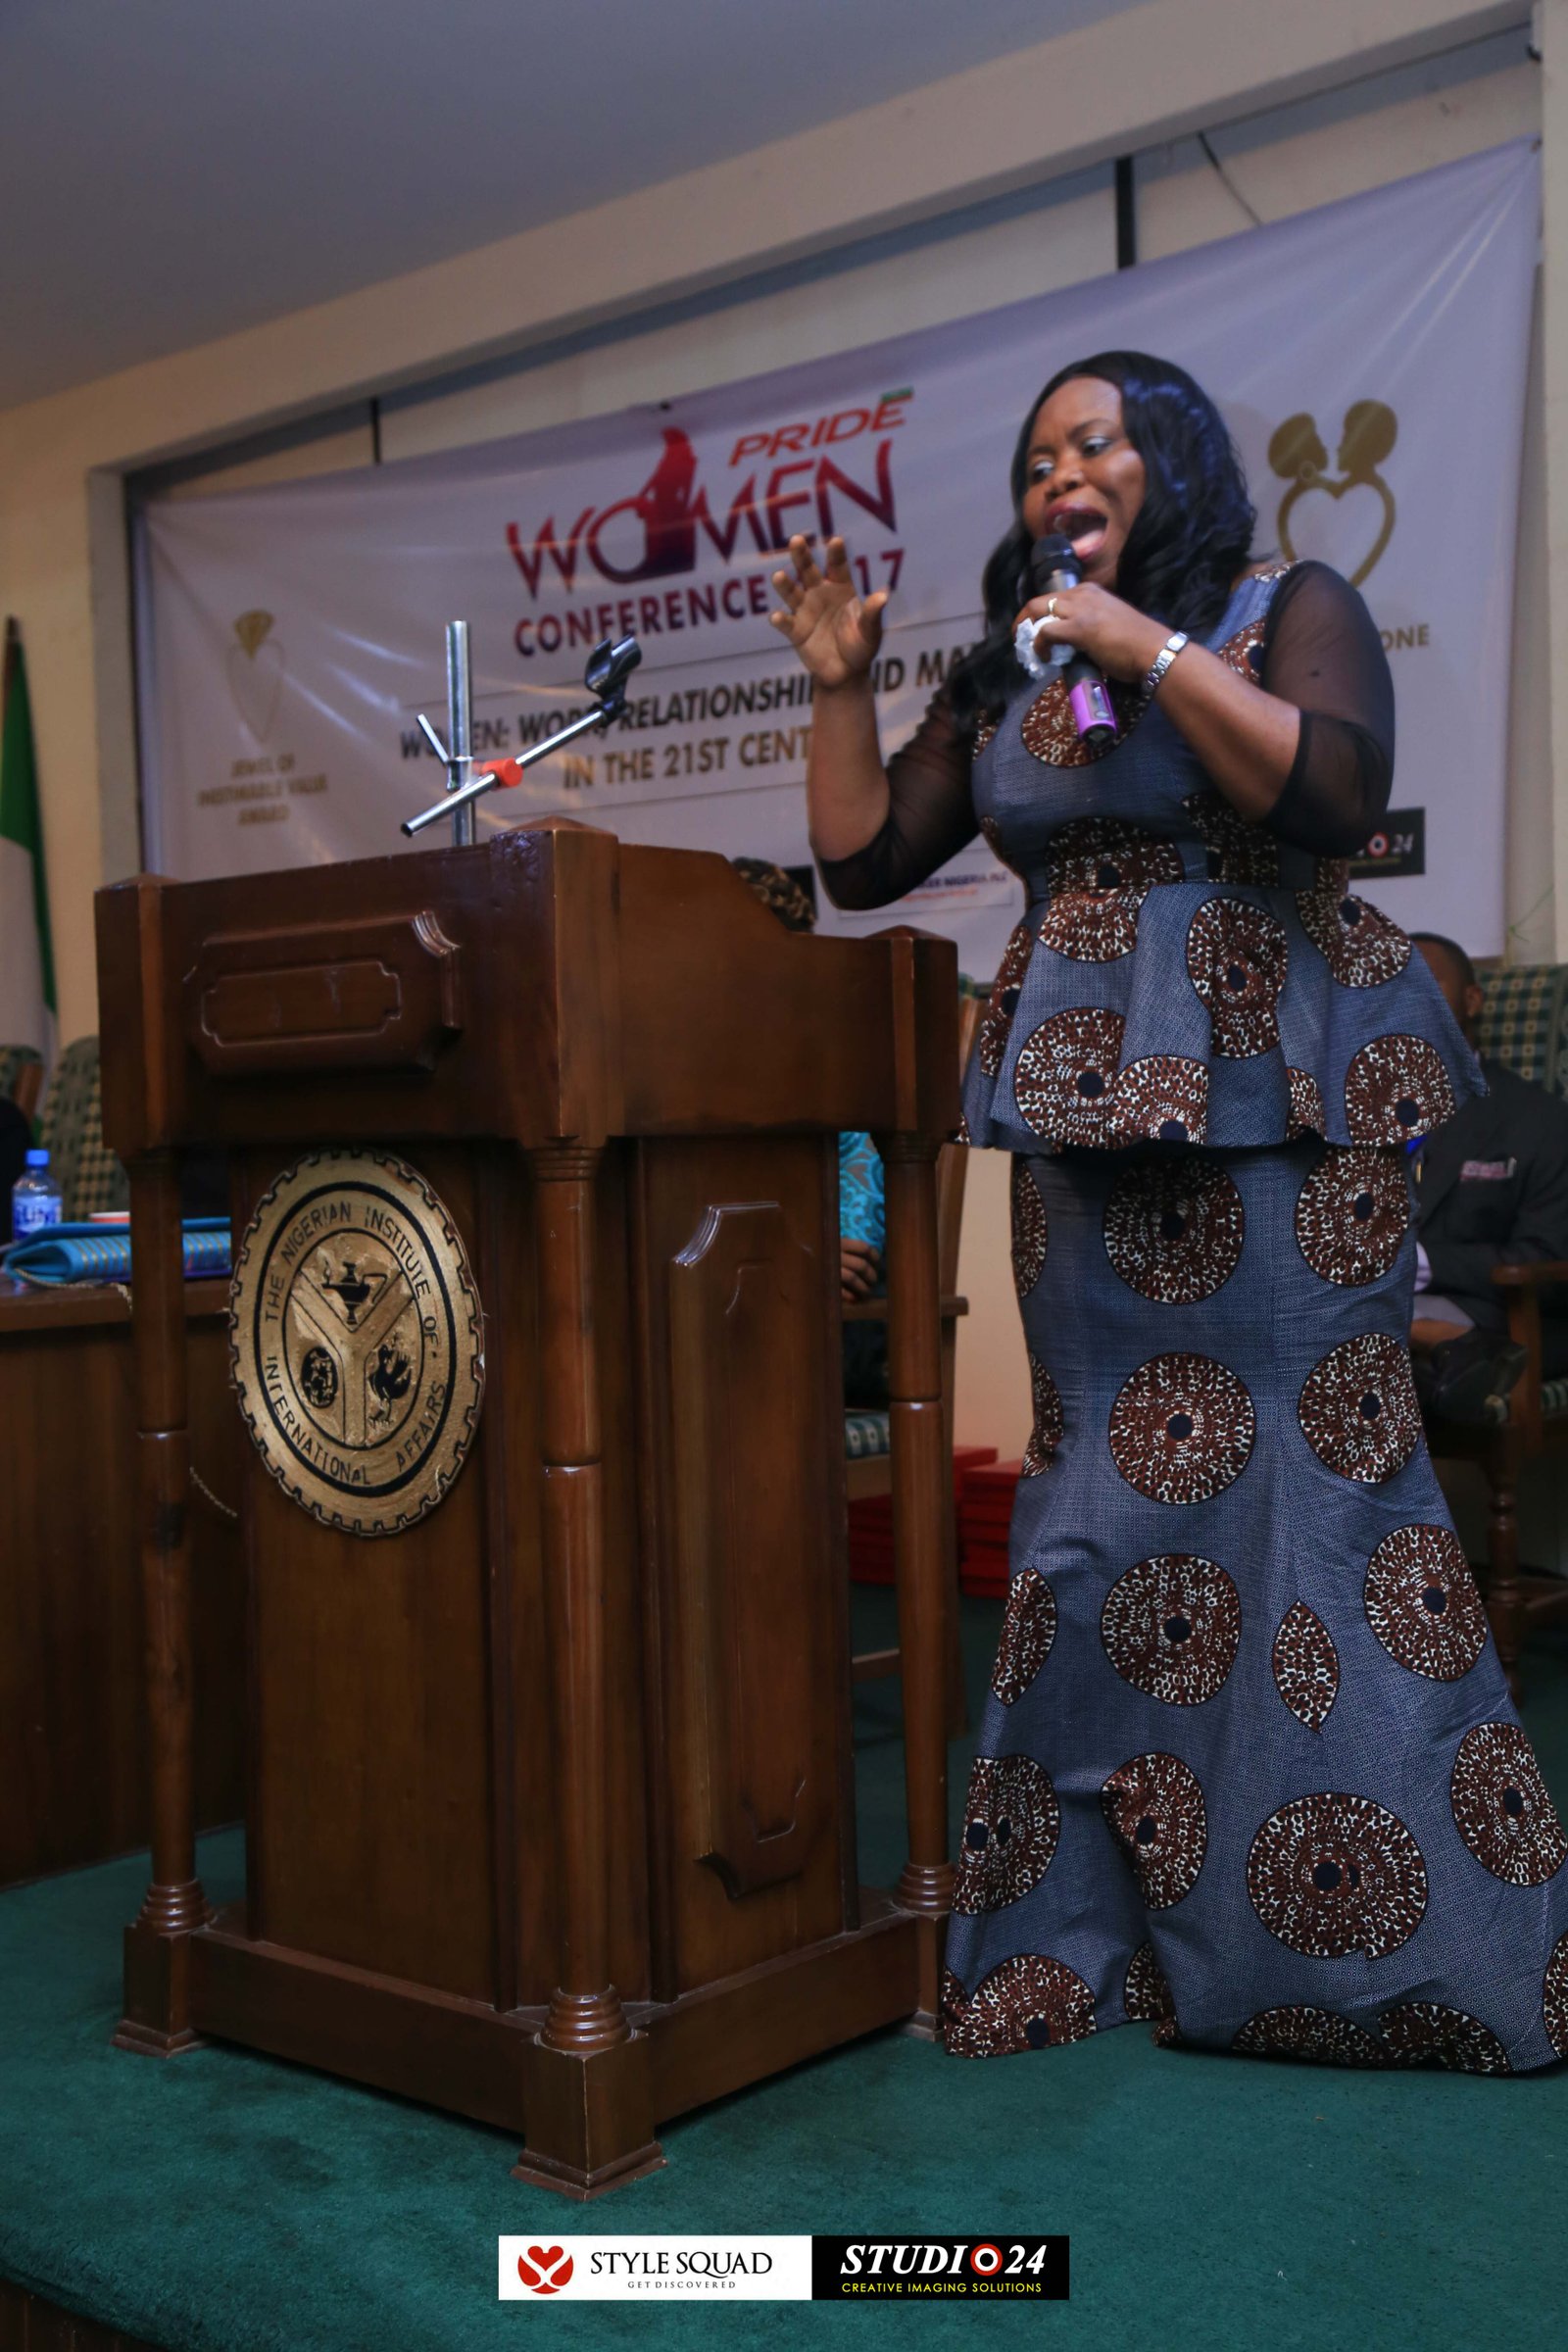 Pride Women Conference 2017 work women and marriage in the 21st century, building a female brand, female empowerment and development in Nigeria, SDGs goal 5, sound mental health and well being among women in Nigeria, Rosemary Onyebigwa